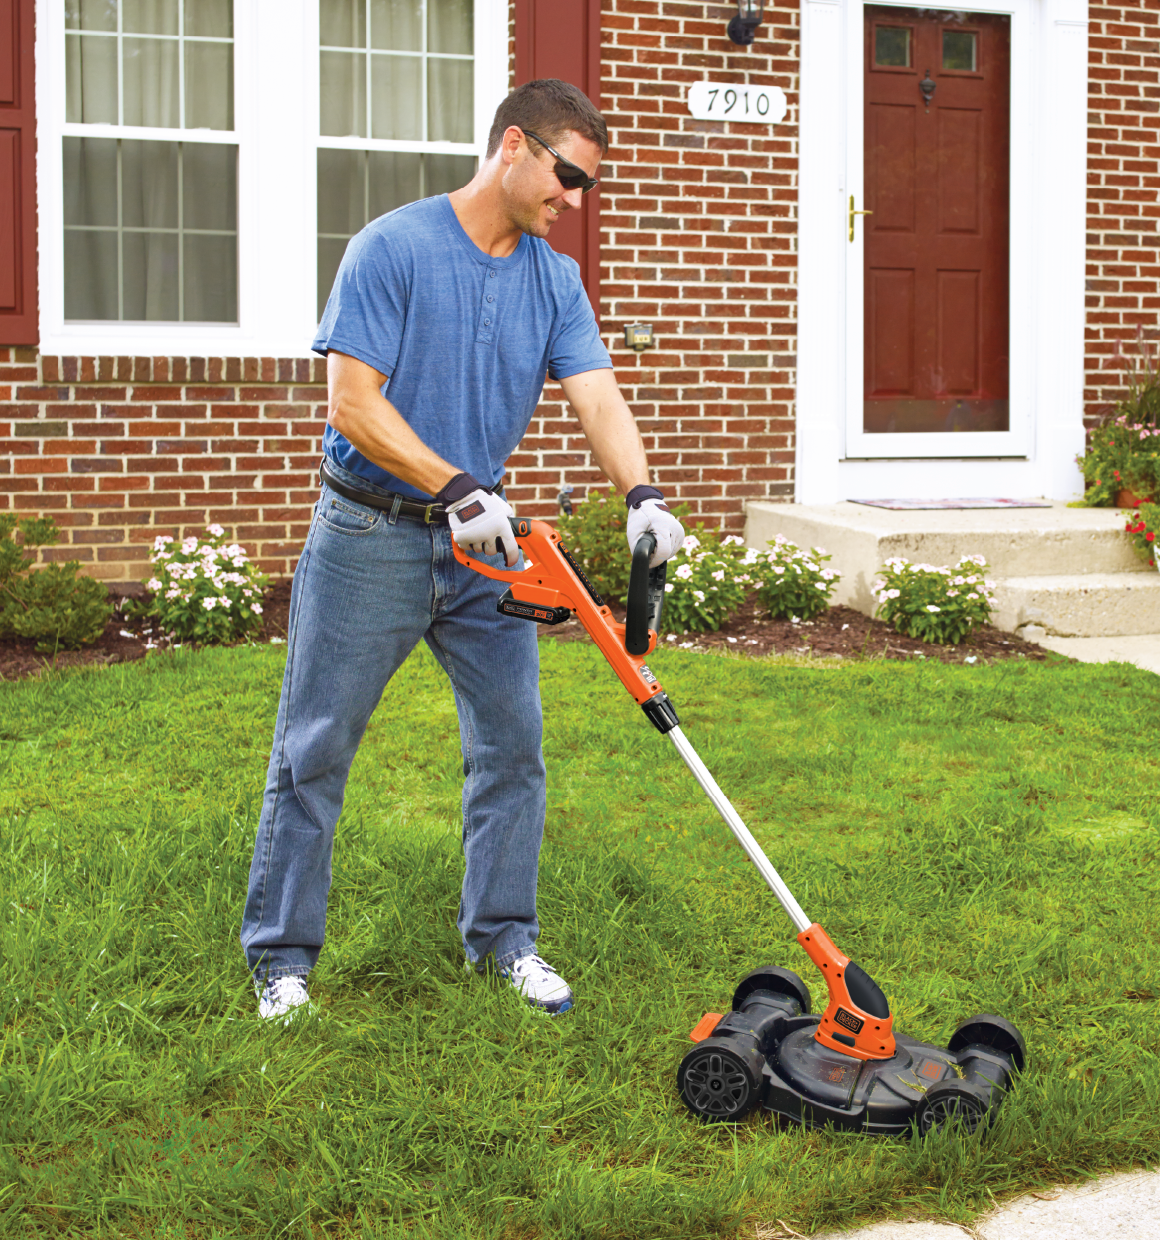 BLACK+DECKER 3-in-1 Lawn Mower with Extra Lithium Battery 2.0 Amp Hour  (MTC220 & LBXR2020-OPE)